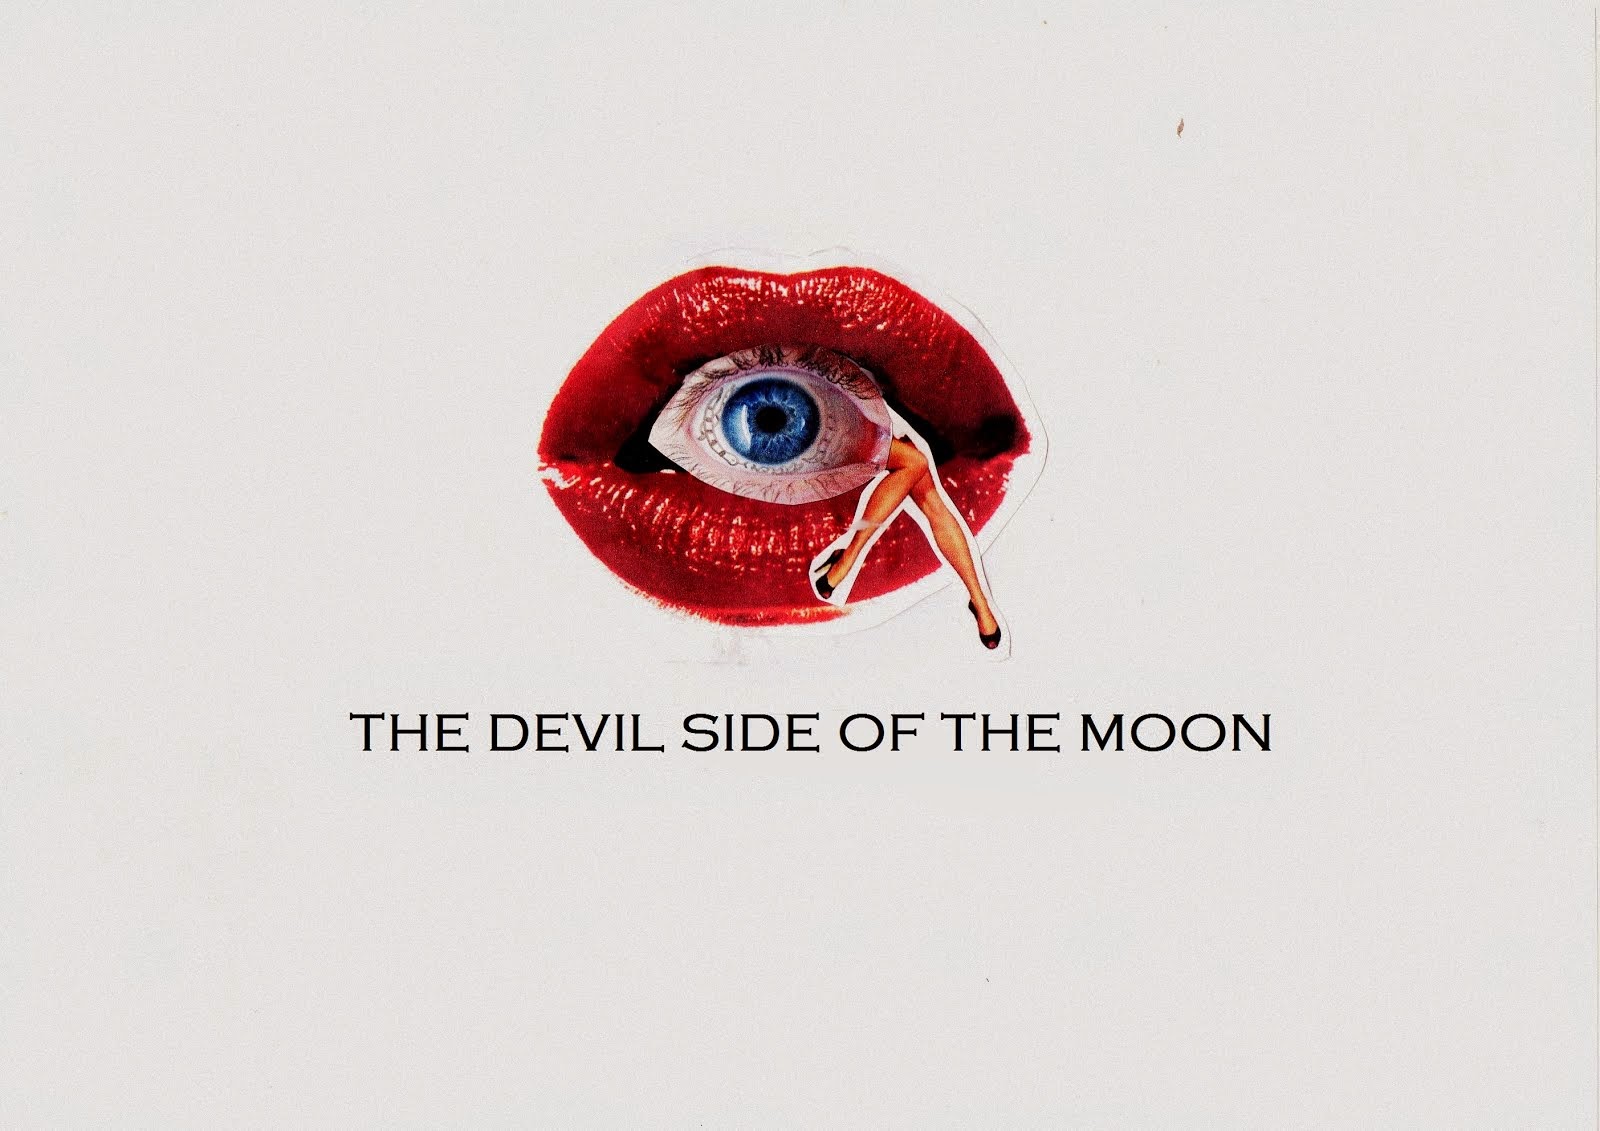 The devil side of the moon